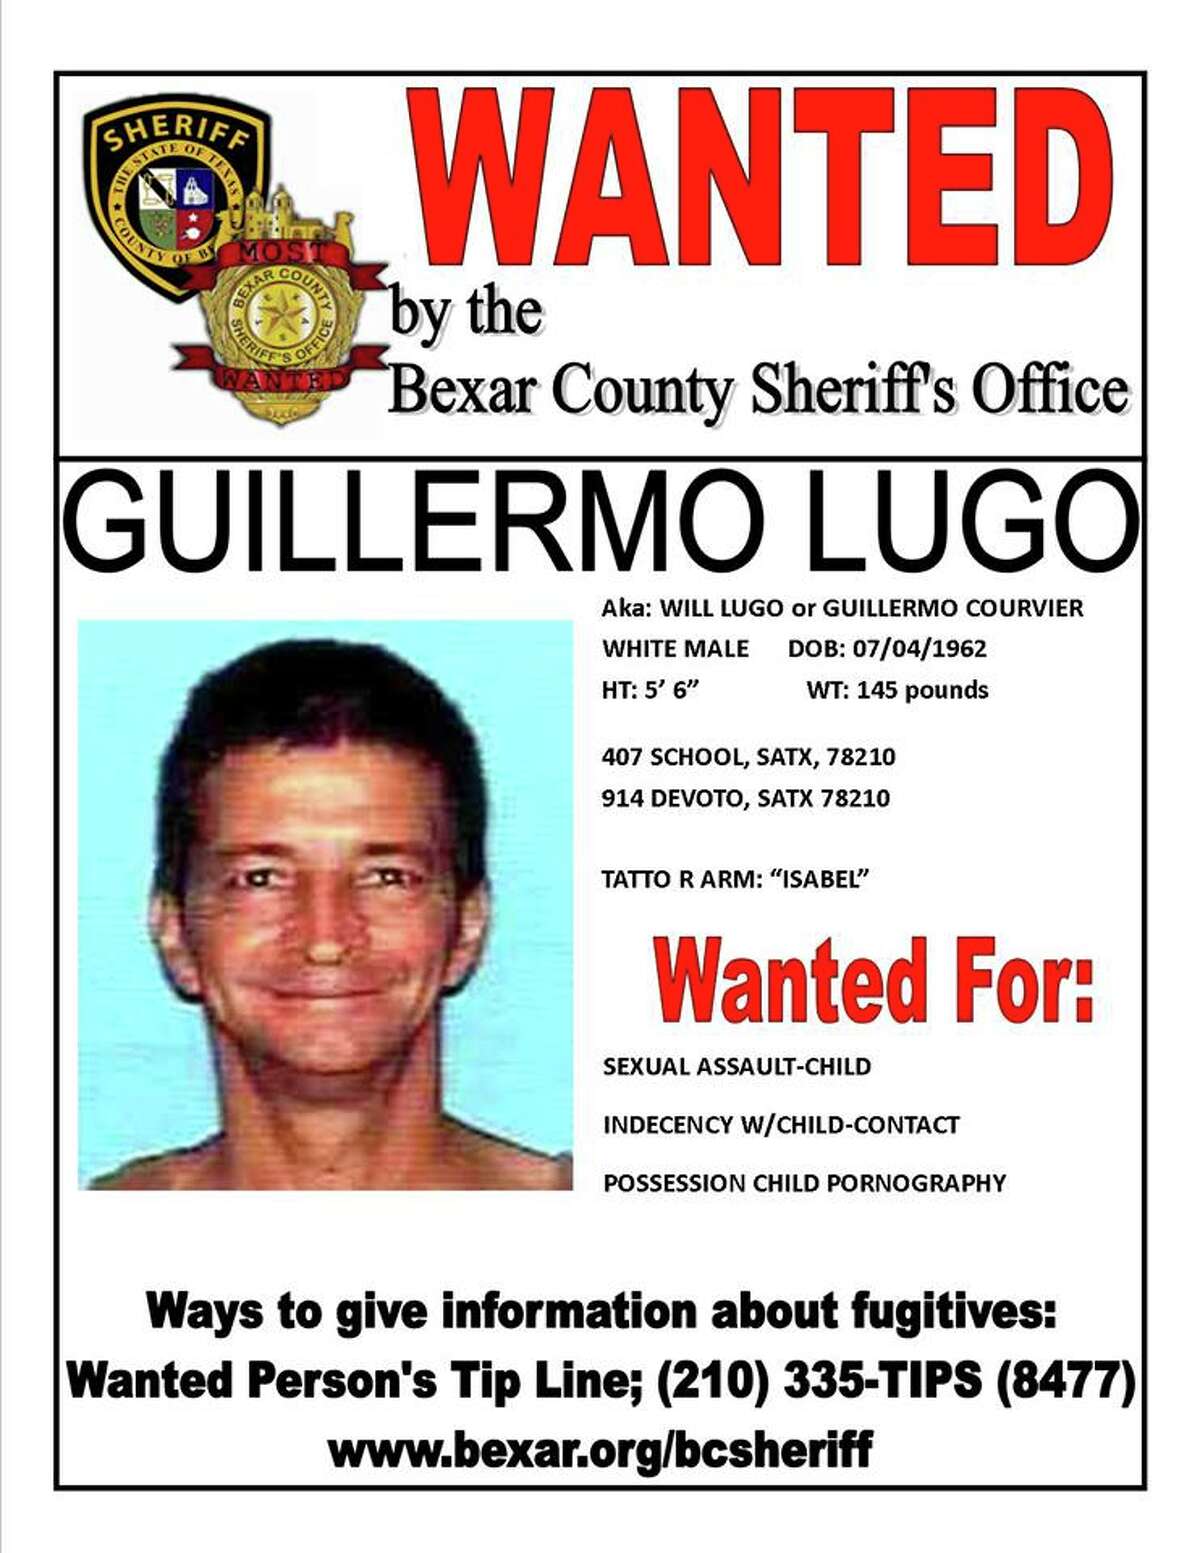 Guillermo Lugo, 51, is wanted by the Bexar County Sheriff’s Office on child pornography and child sexual assault charges.